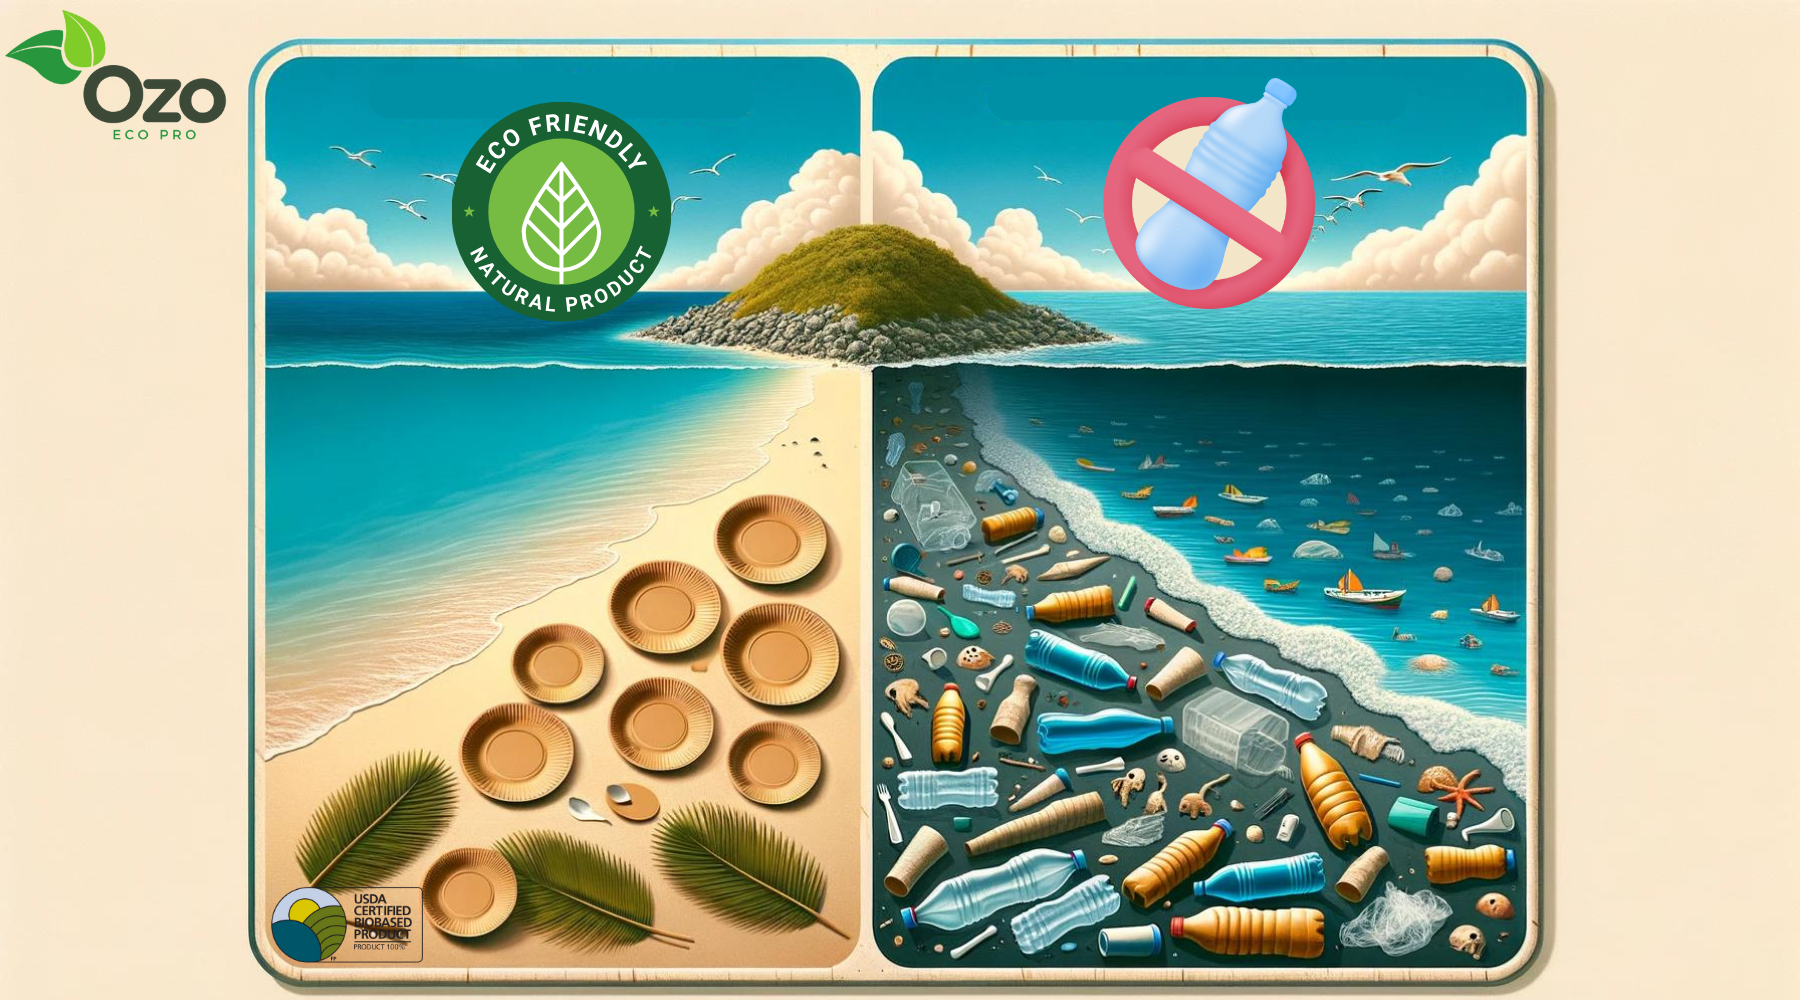 A split-screen image representing the contrast between eco-friendly practices and pollution. On the left, a pristine beach is shown with golden sand, lush palm leaves, and biodegradable items, such as wooden plates and cutlery, lying on the shore. Badges on the corners indicate 'Ozo Eco Pro' and 'USDA Certified Biobased Product'. Above the beach, the words 'Eco Friendly' and 'Natural Product' are enclosed within a green leaf badge. On the right side, the ocean is littered with various plastic wastes, including bottles, straws, and bags, showcasing the detrimental effects of plastic pollution. A symbol prohibiting plastic bottles is prominently displayed against the blue sky.